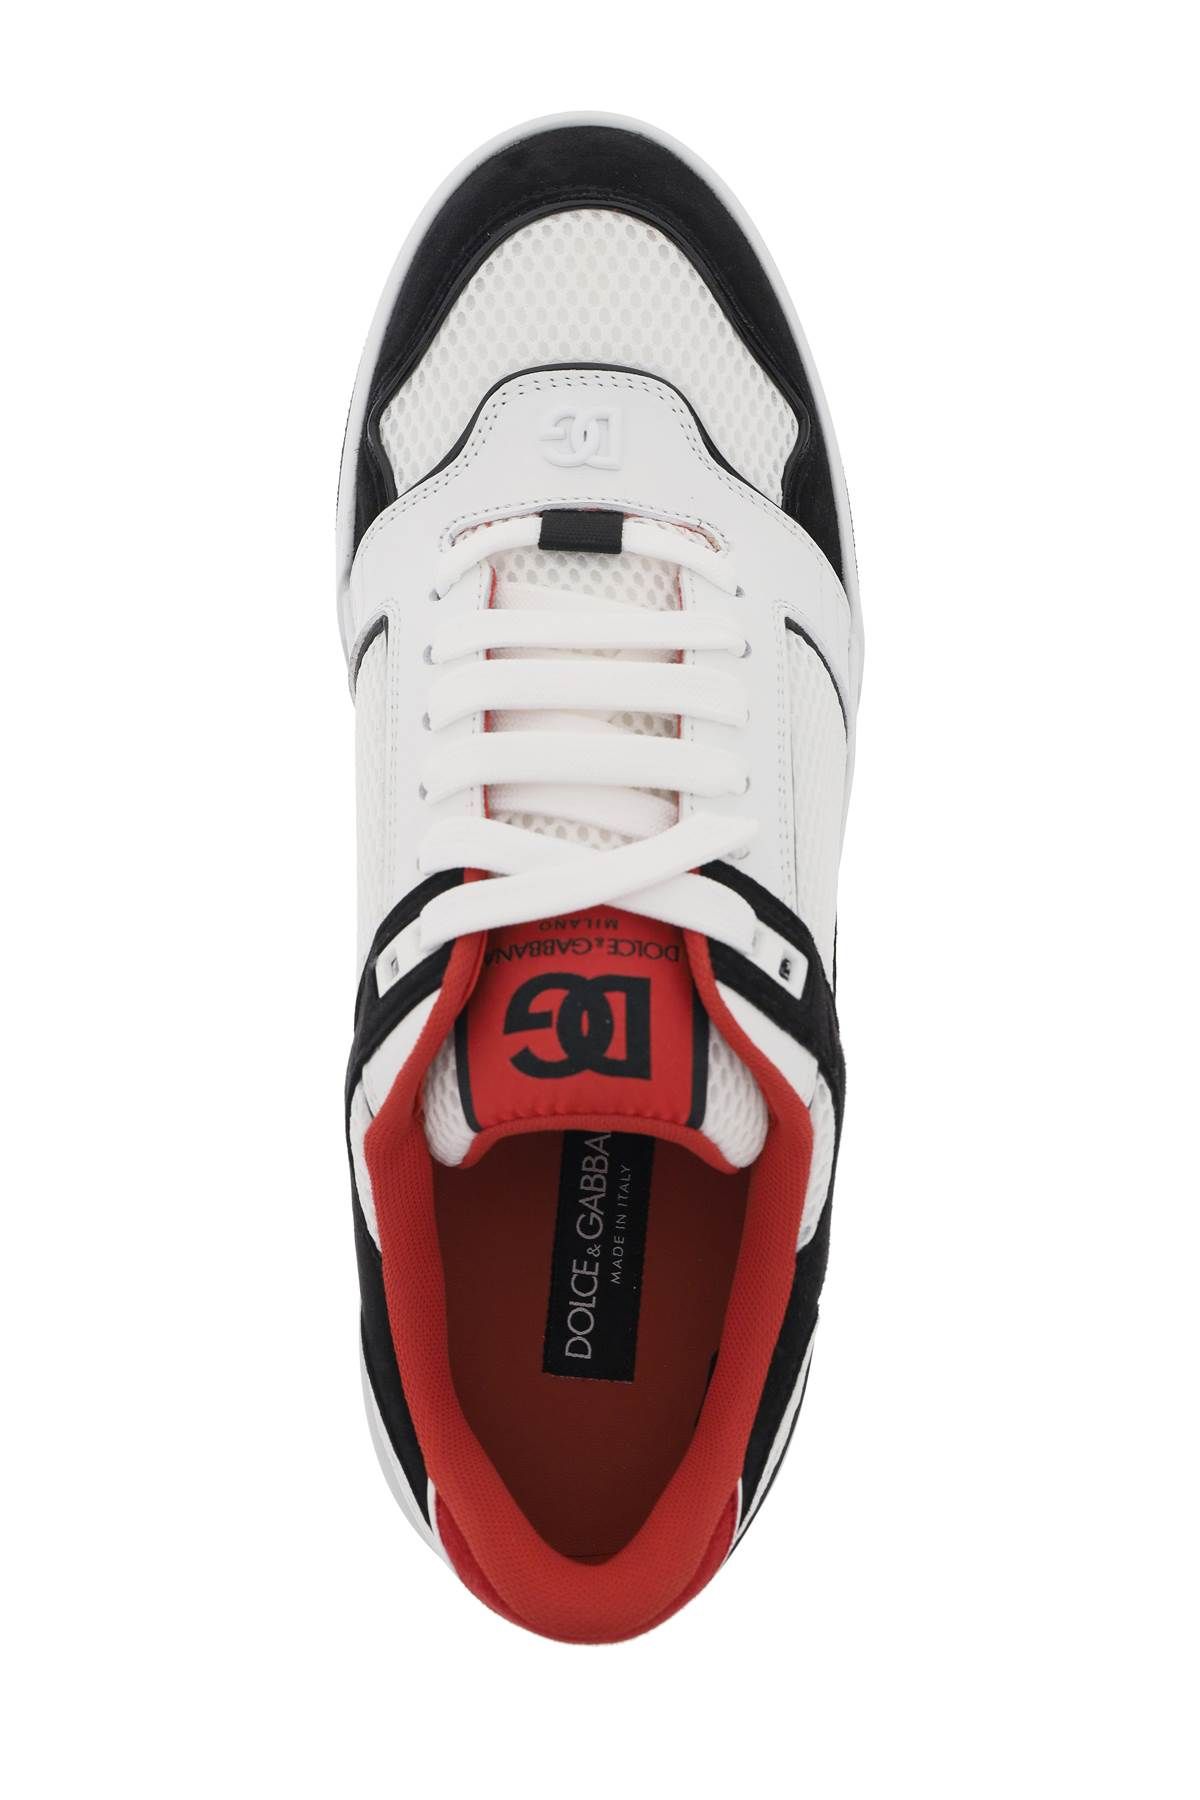 Shop Dolce & Gabbana New Roma Sneakers In White,black,red